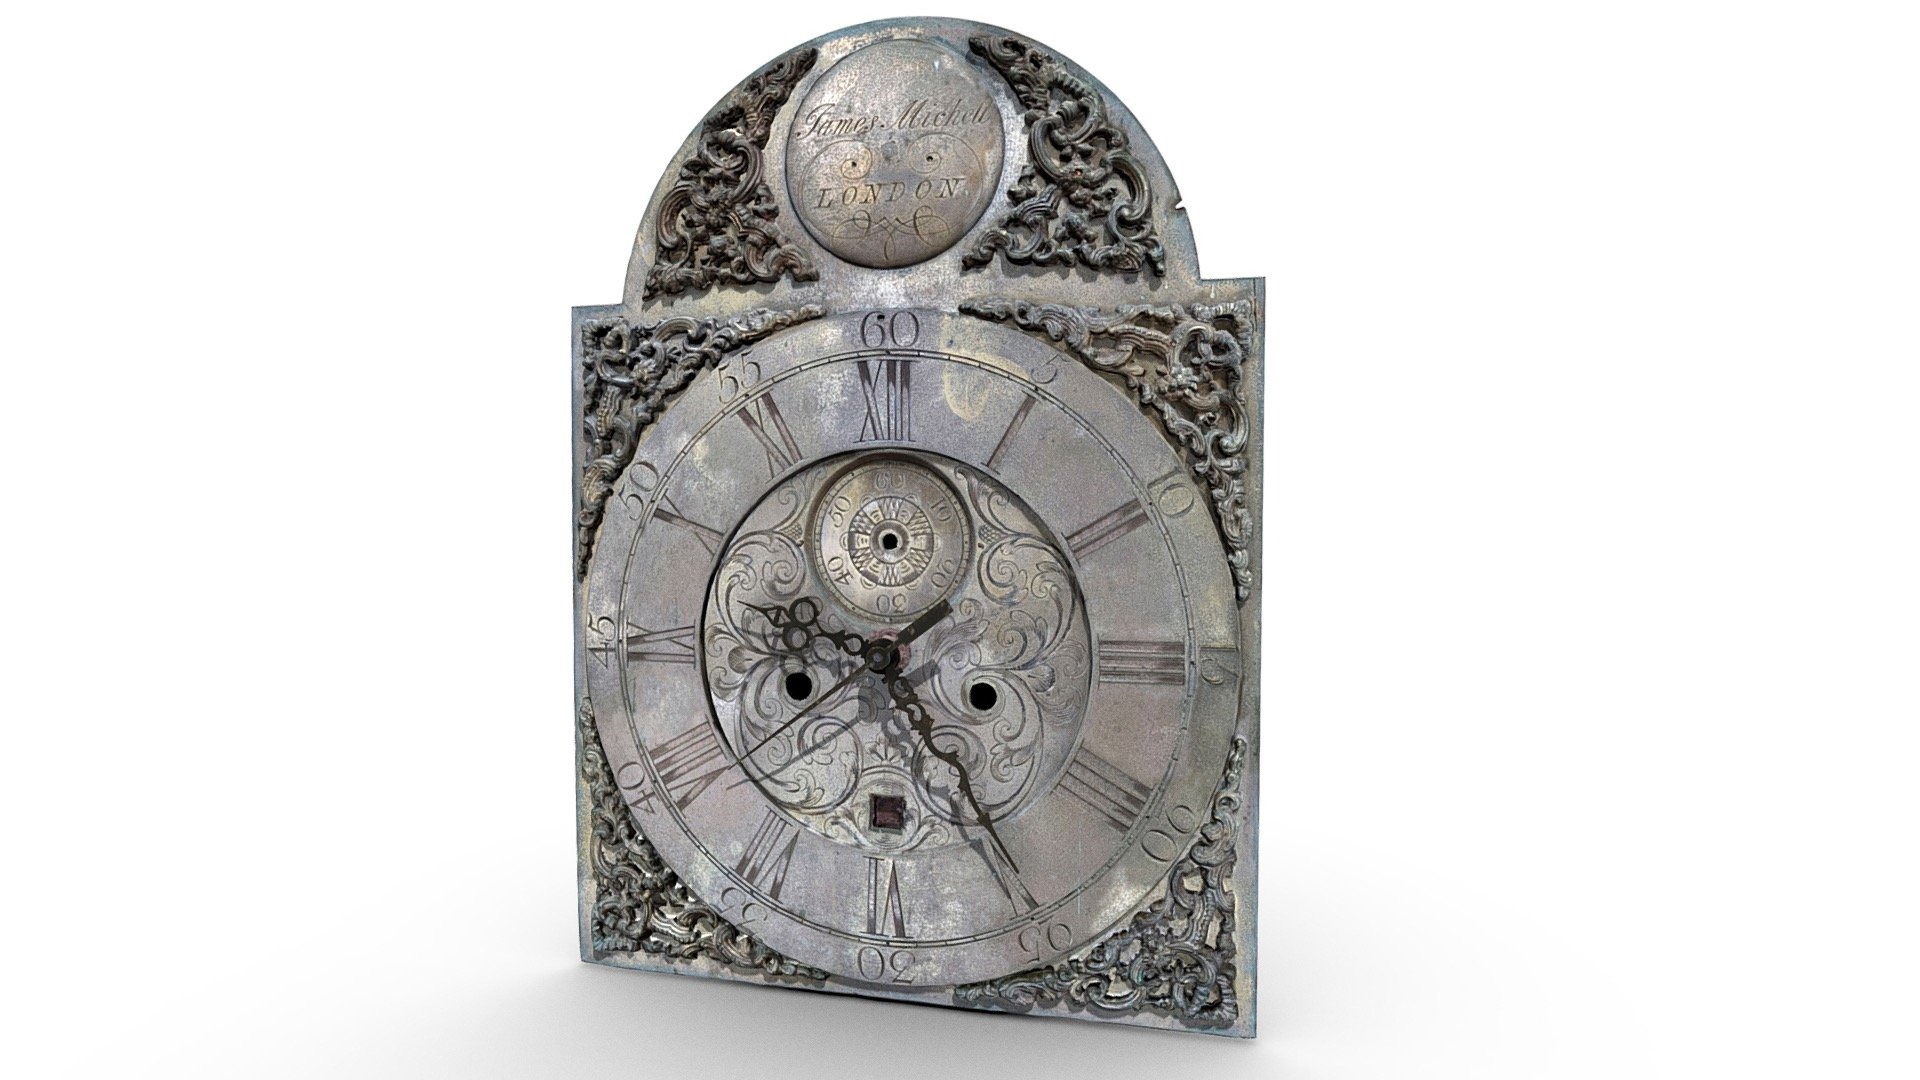 This modified lantern wall clock converted to a clockwork mechanism, exhibits an arched dial with detailed scrollwork. It has the name James Michell of London on its face. The clock is part of the collection from the Moseley Homestead, a National Register of Historic Places site in Brandon, Florida. The 1886 homestead was originally owned by Charles Scott Moseley and his wife Julia Daniels Moseley and later their descendants. Charles Scott Moseley was an inventor and watchmaker, including time as a watchmaker with the Elgin plant in Illinois, where he had a 40-year career as First Superintendent. The Moseley collections include several examples of early watches and clocks, including this piece that possibly dates to c. 1780 - 1820  based on its dial characteristics, presence of double numbering with minutes and a second hand, engraved spandrels, trefoil hands, and overall design 3d model